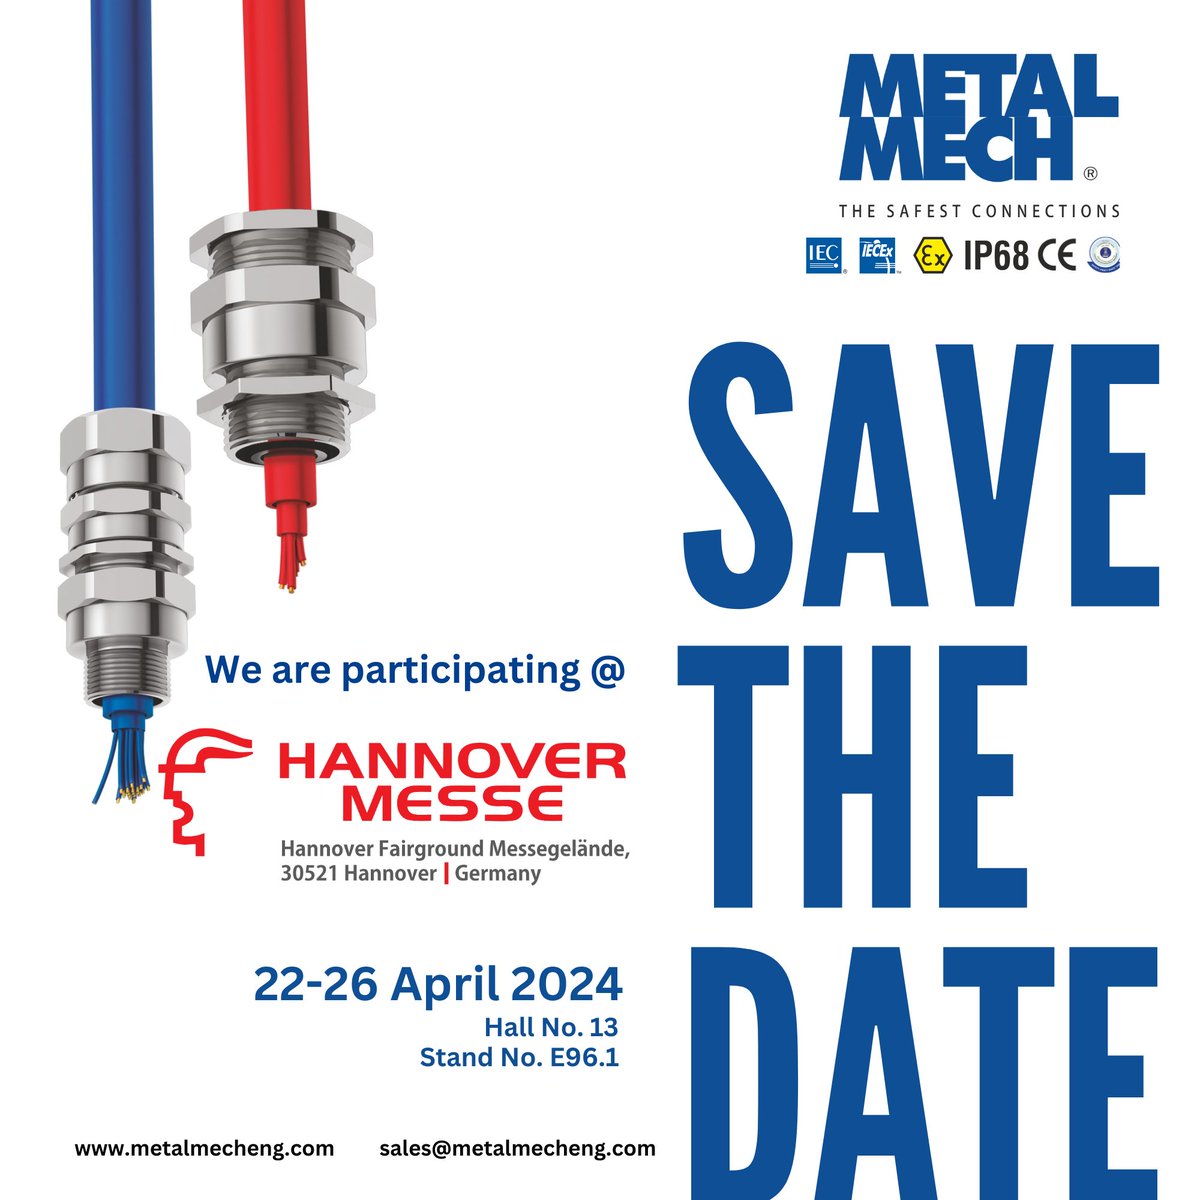 Save the date for @hannover_messe Fairground, #Germany on 22-26 April 2024, Hall 13, Stand E96.1. Join us at this prestigious event!

metalmecheng.com

#HANNOVERMESSE #GOST #ATEX #IECEx #Eurasianconformitymark #PESO #ip66 #ip68 #UKAS #NABCB #OHSAS #RoHS #Europeanunion